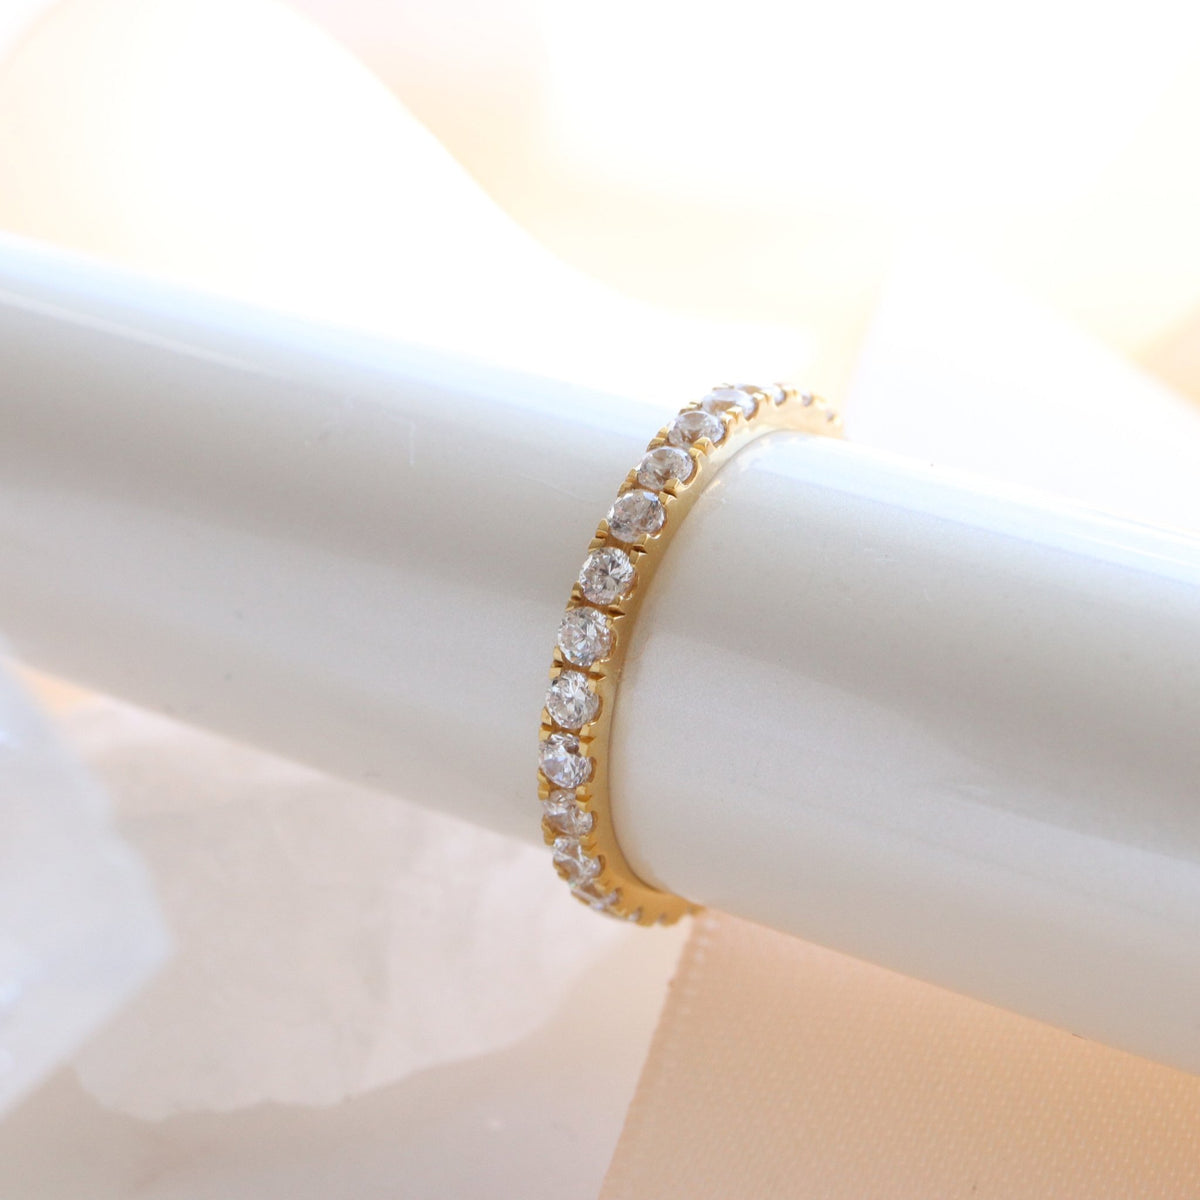 LOVE ETERNITY BAND - CUBIC ZIRCONIA &amp; GOLD - SO PRETTY CARA COTTER